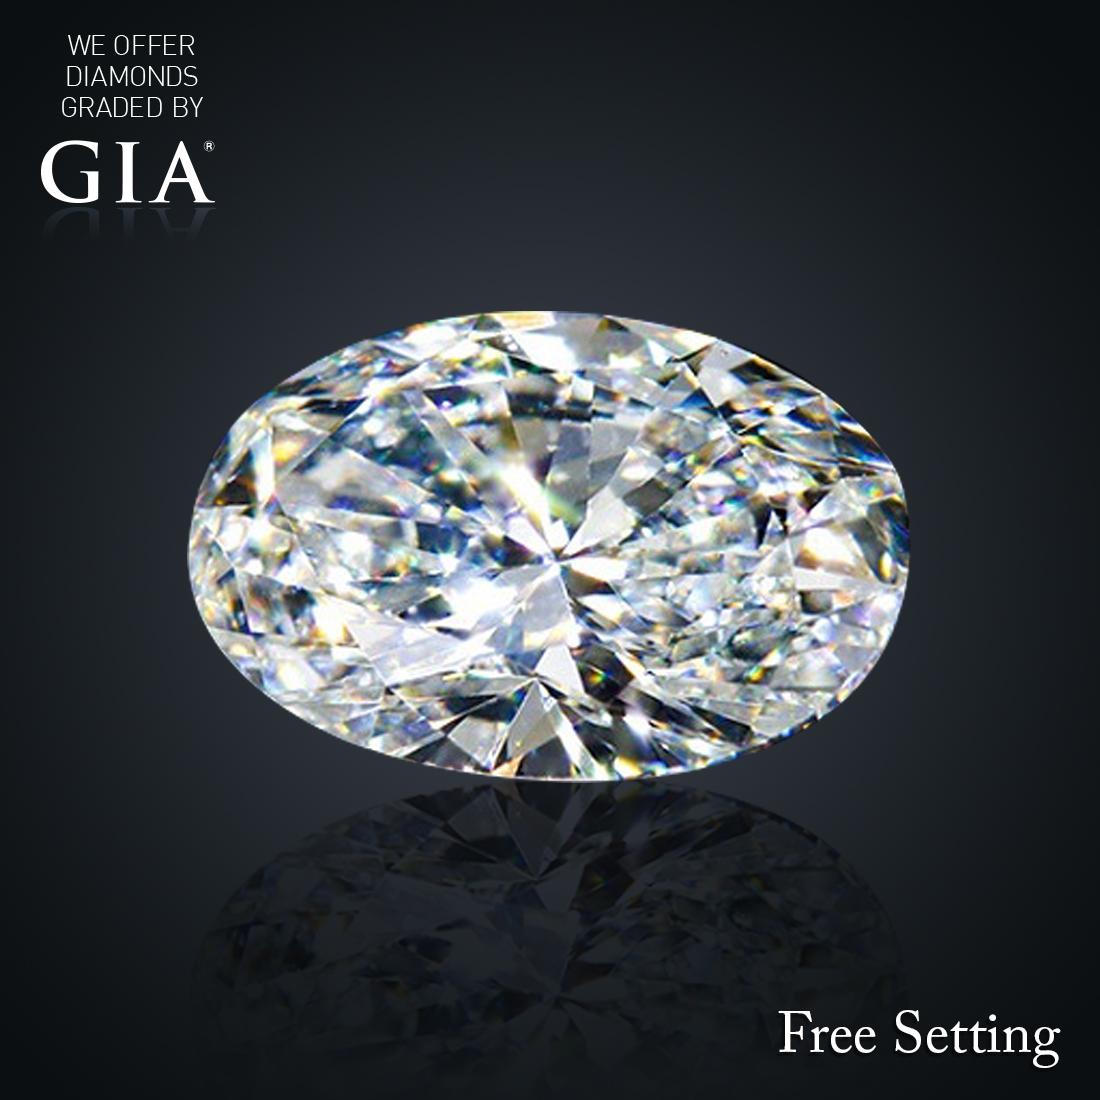 1.00 ct, F/VS2, Oval cut Diamond, 51% off Rapaport List Price (GIA Graded), Unmounted. Appraised Val